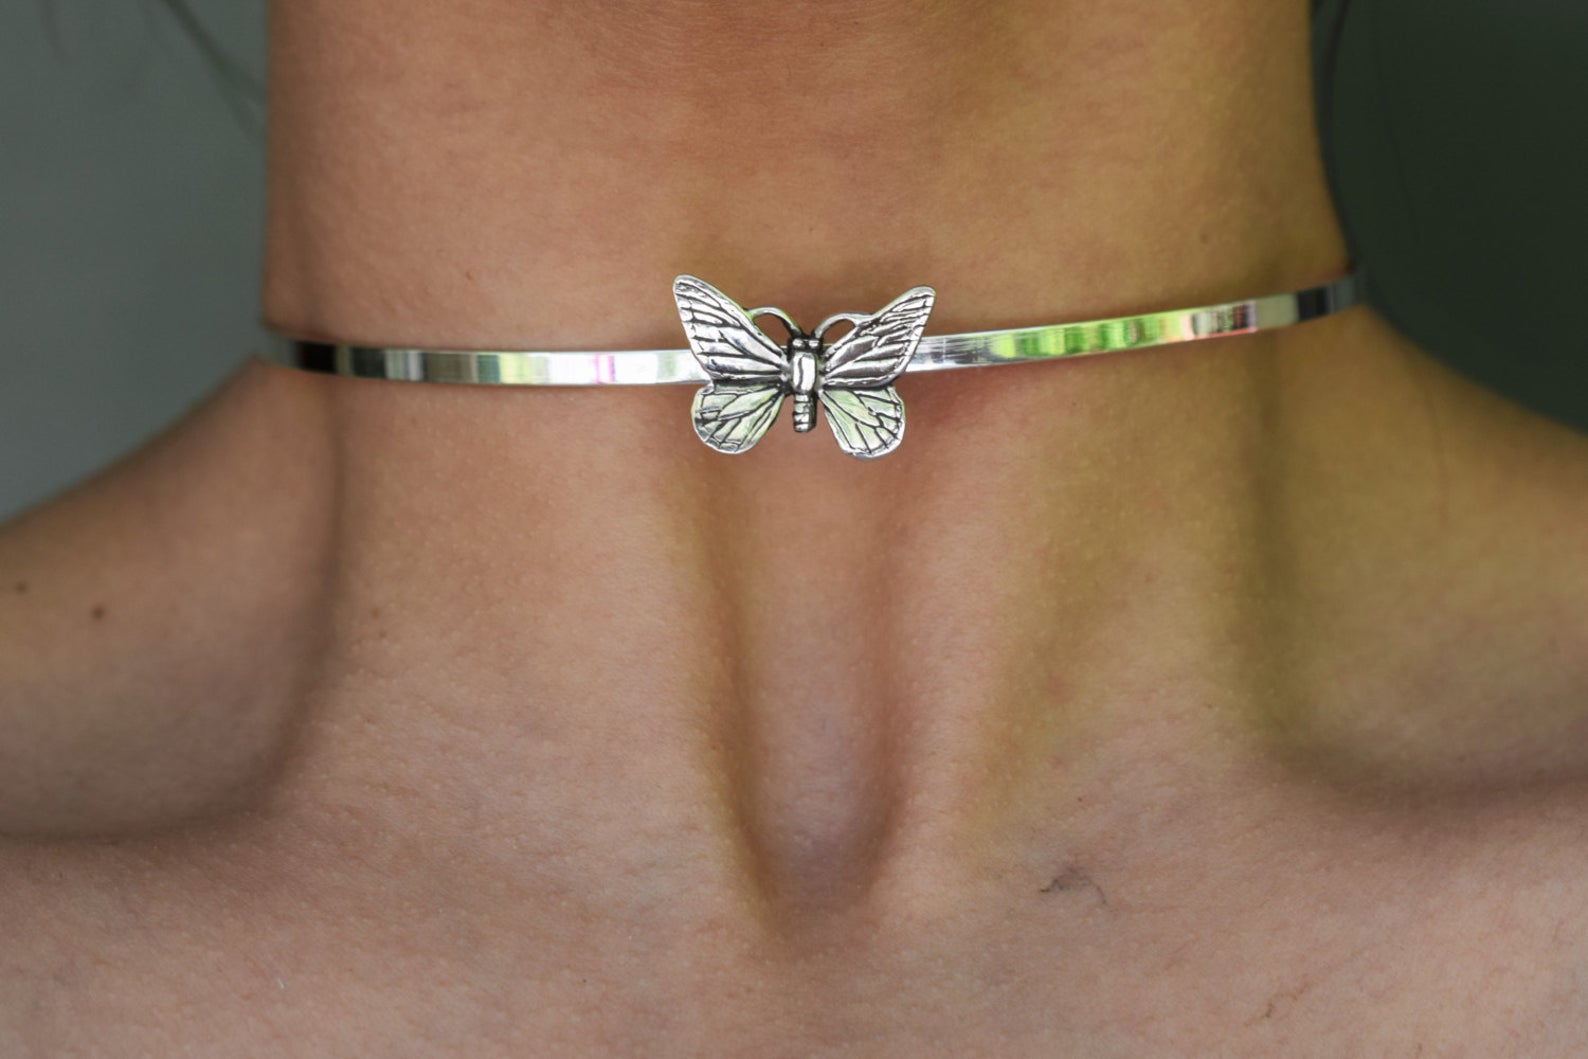 Solid 925 Sterling Silver BDSM Micro Butterfly Cuff Collar   g1